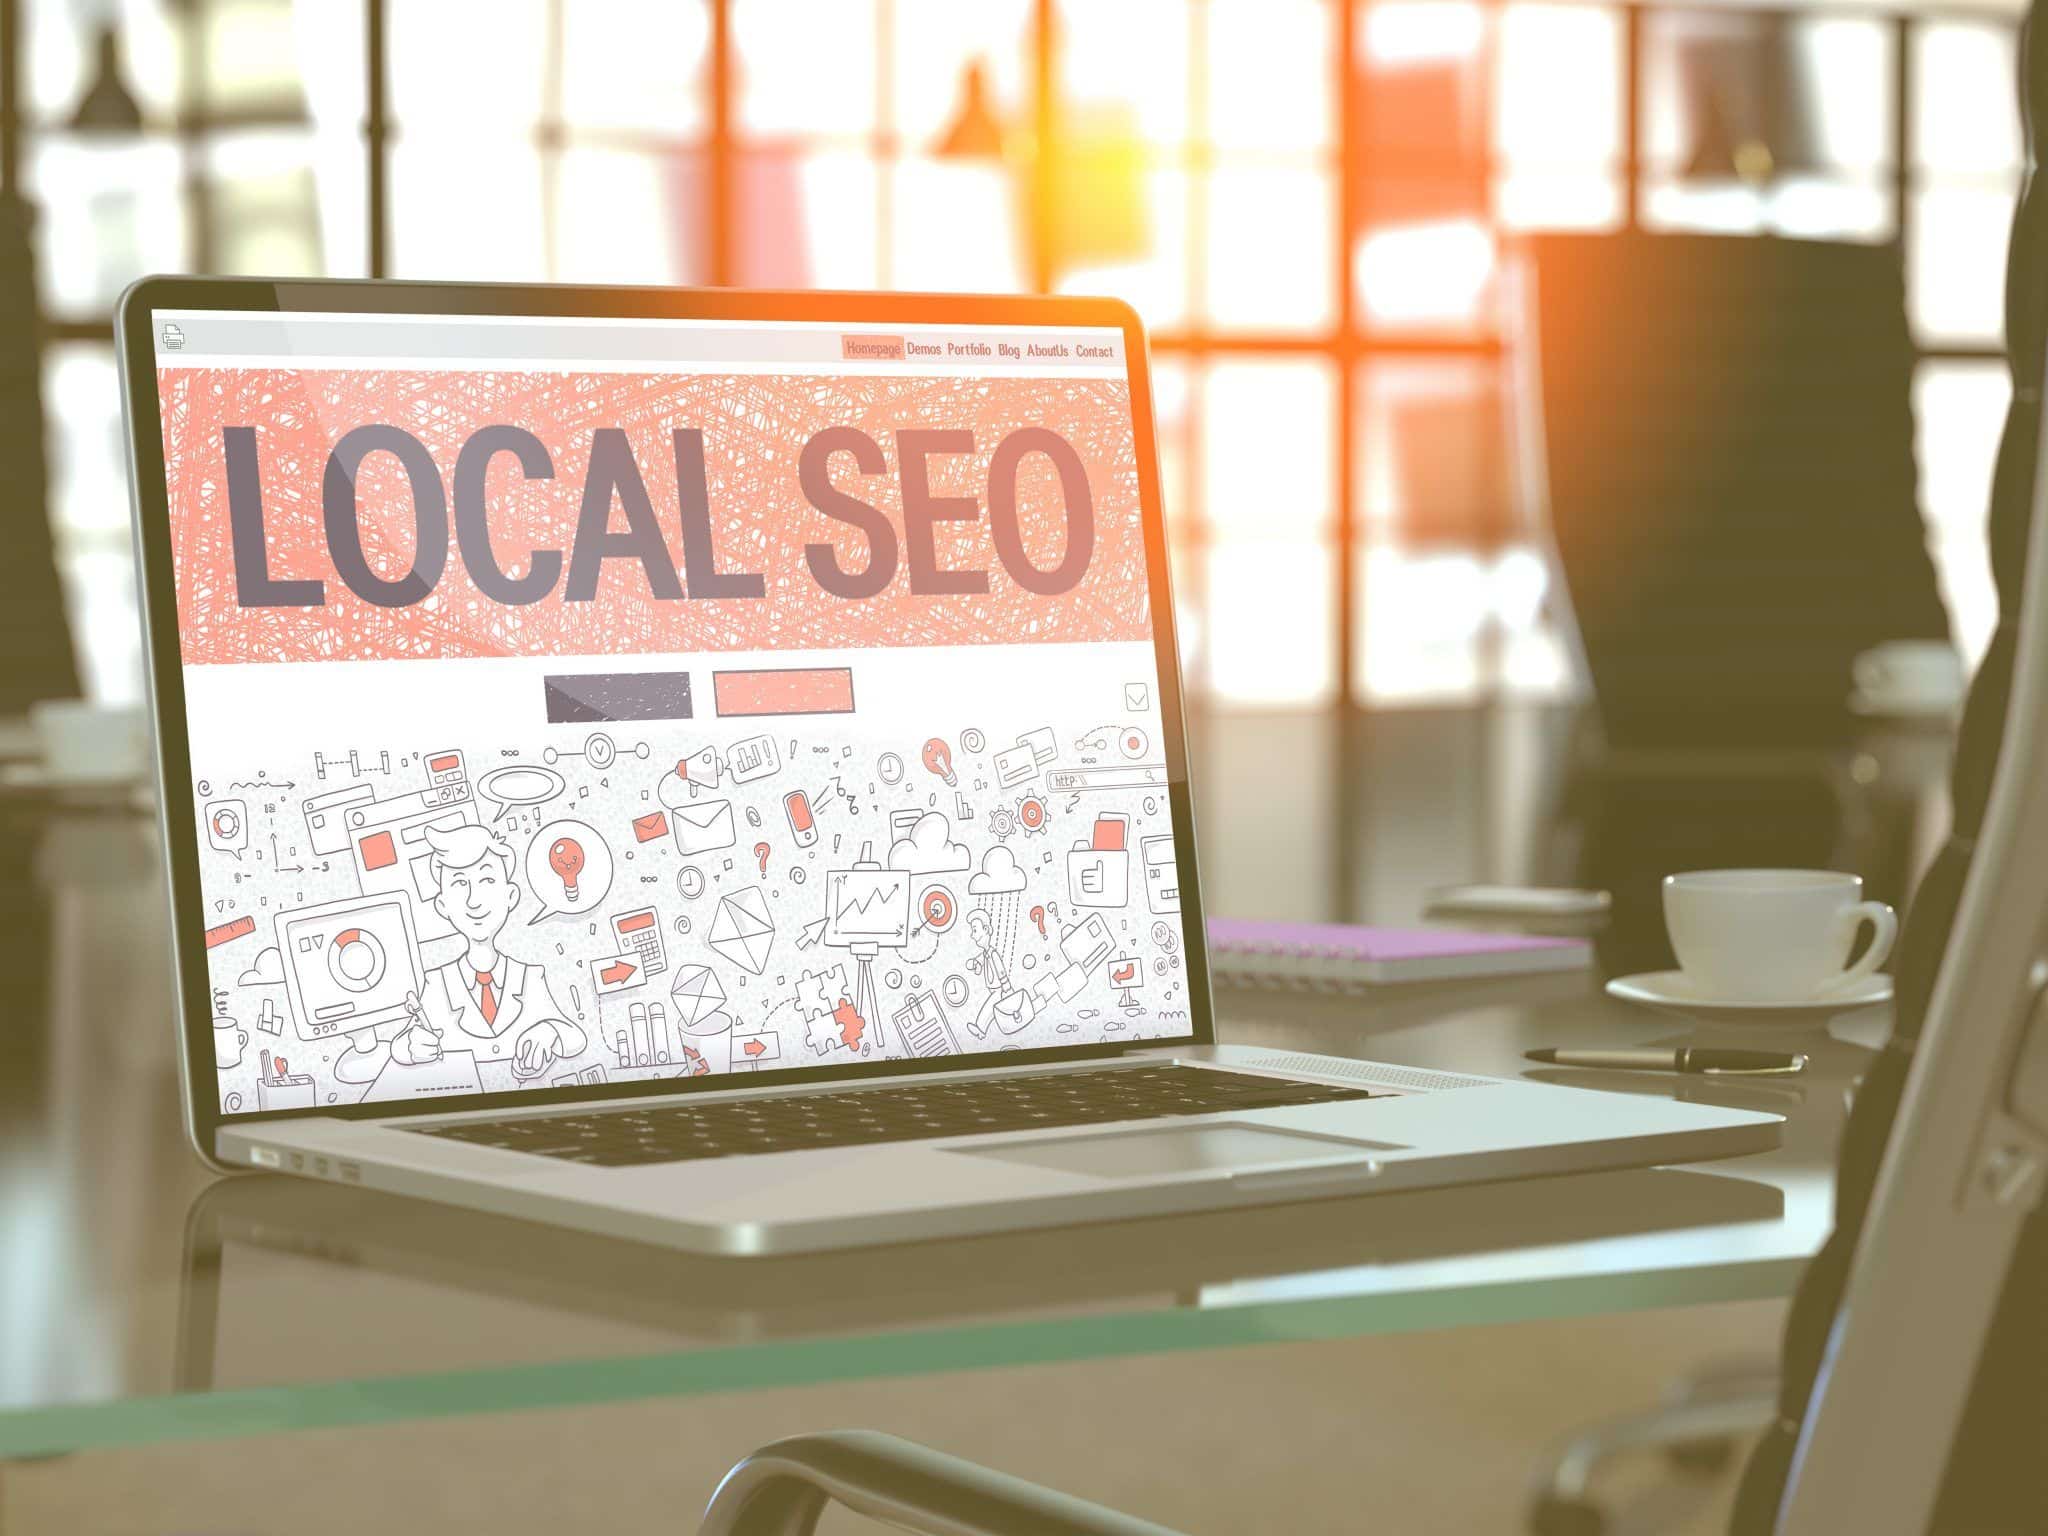 Improve your local SEO by being consistent, searchable, and informative.